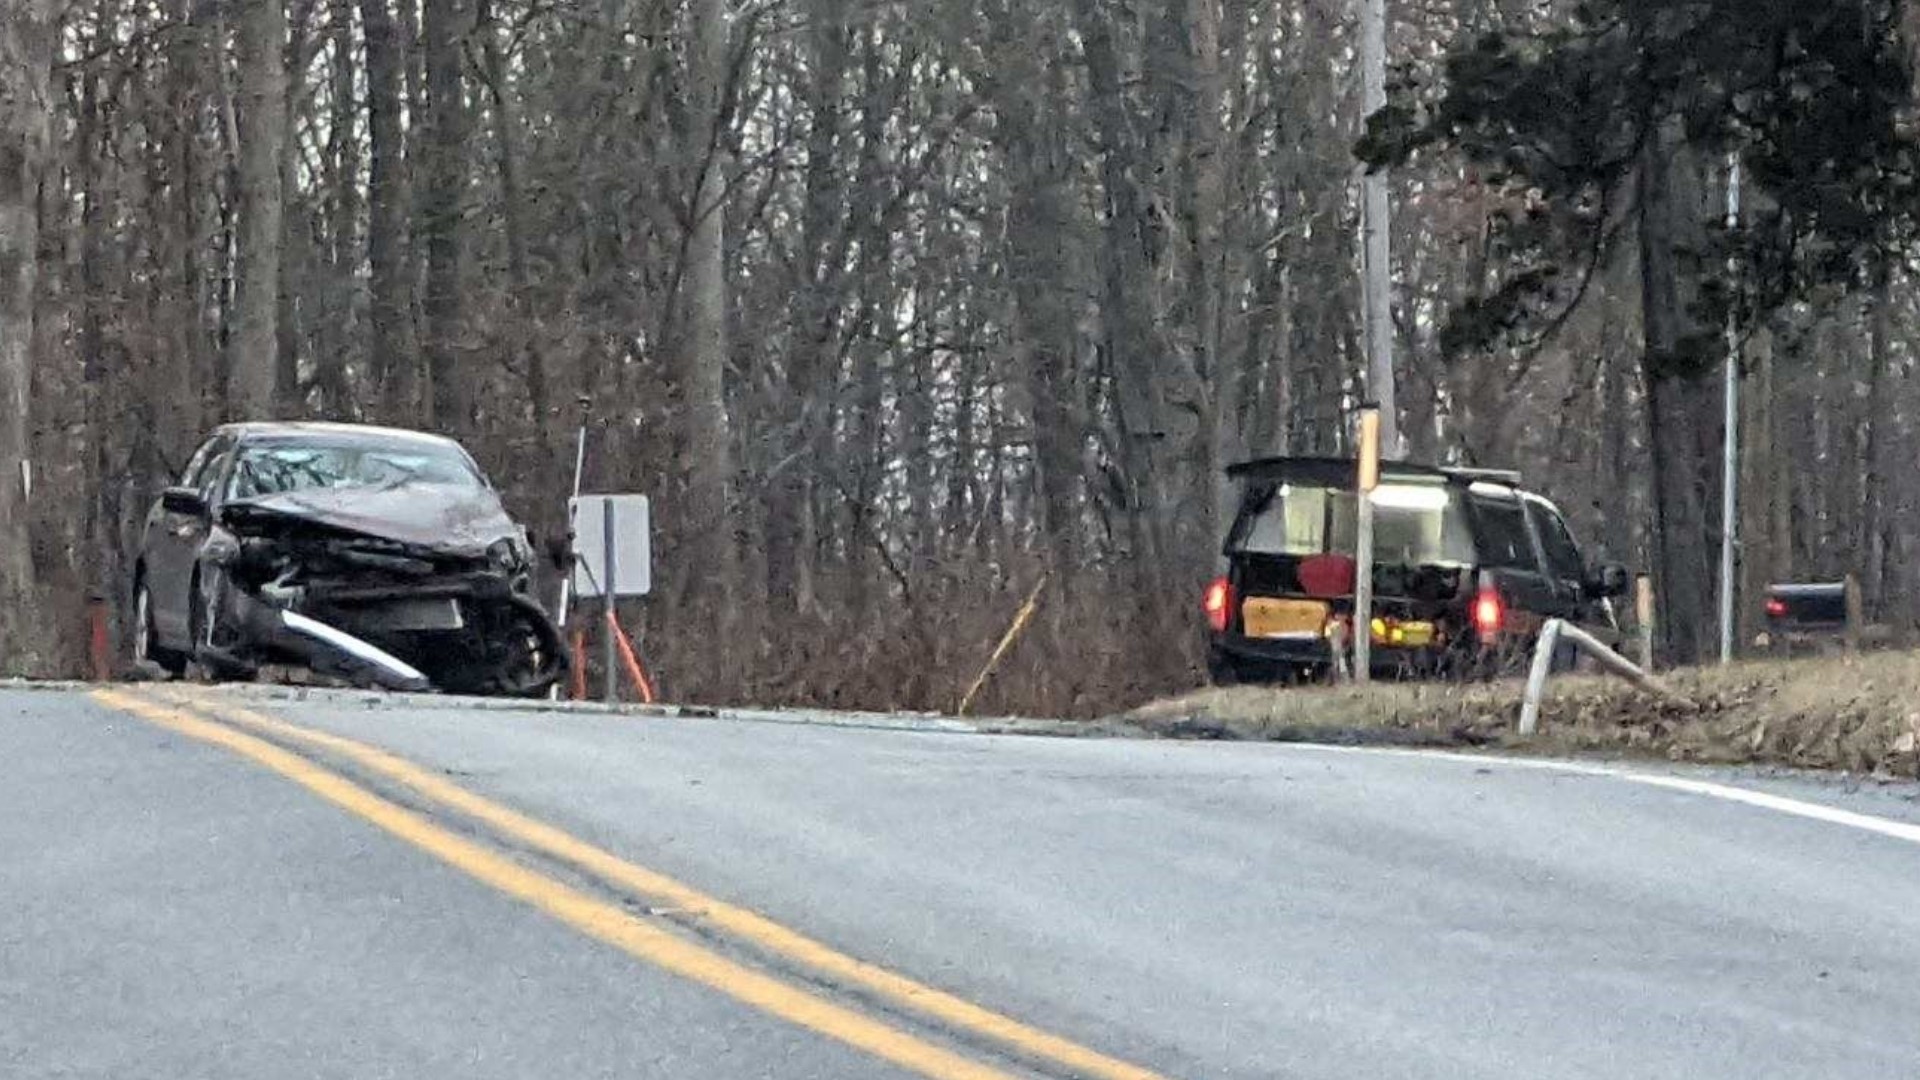 According to State Police, Thomas Zinobile, 52, of Three Springs, was killed in a two-vehicle crash this morning. Another man was injured.